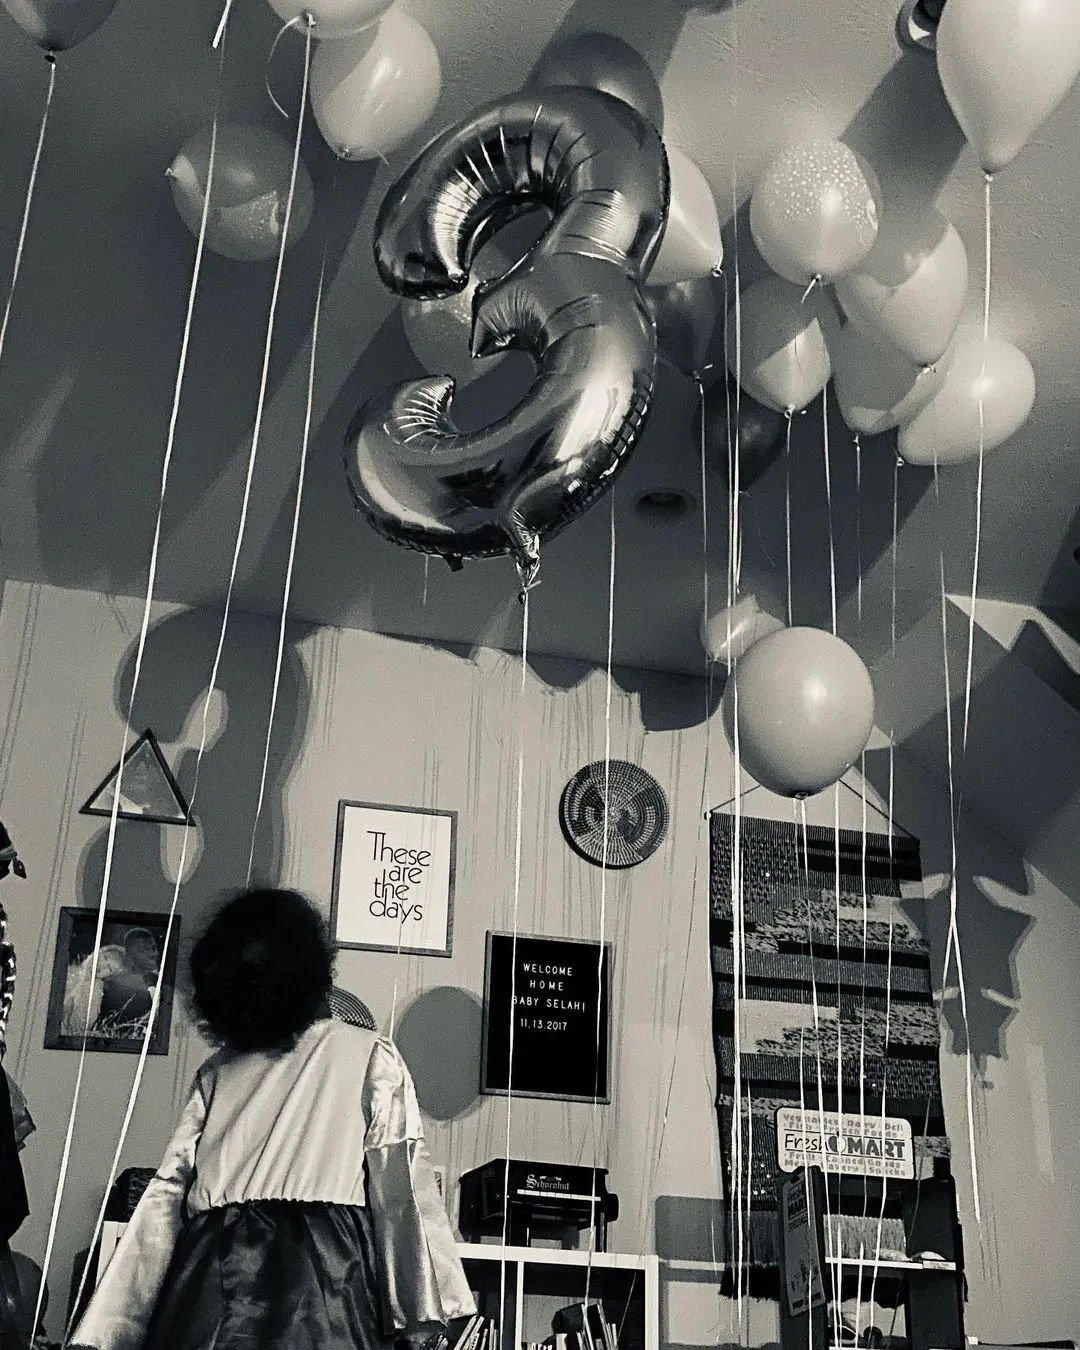 Justin and his wife Shekinah surprised their child by filling the room with balloons on her third birthday.